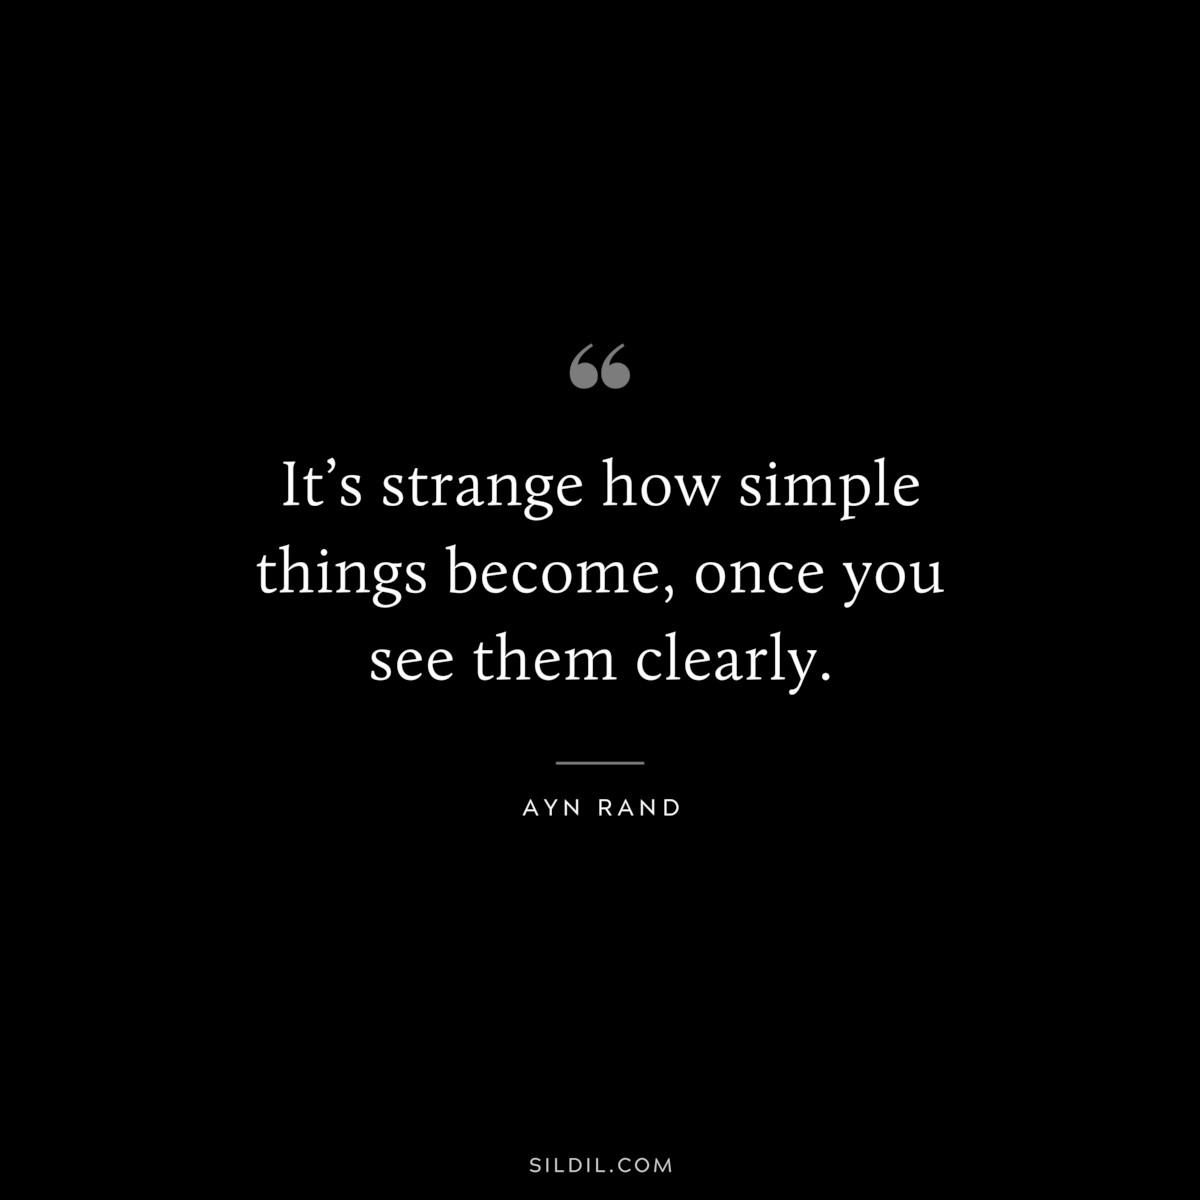 It’s strange how simple things become, once you see them clearly. ― Ayn Rand